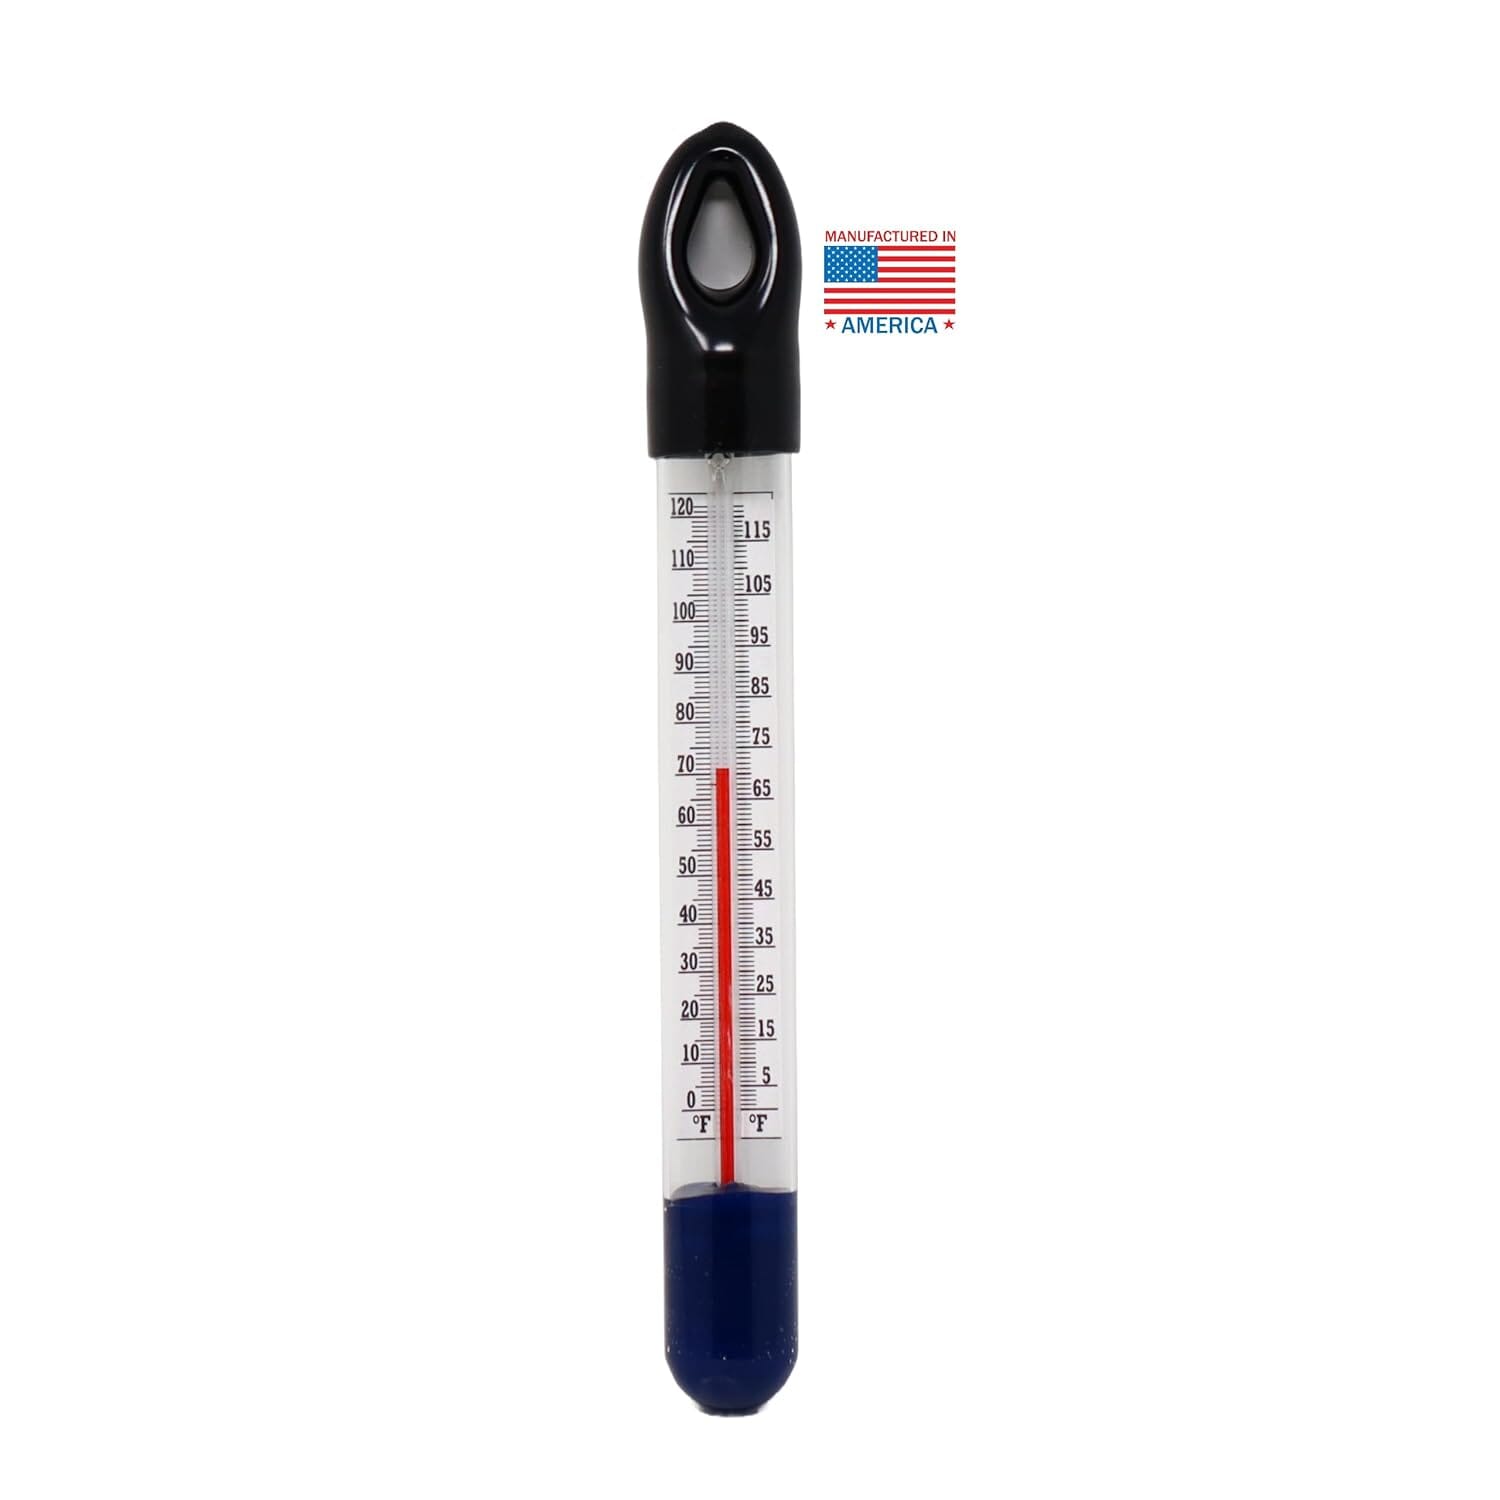 Glass Floating Thermometer Homebrew Beer Winemaking 0 to 122F Made in America Accessories Brewing America 